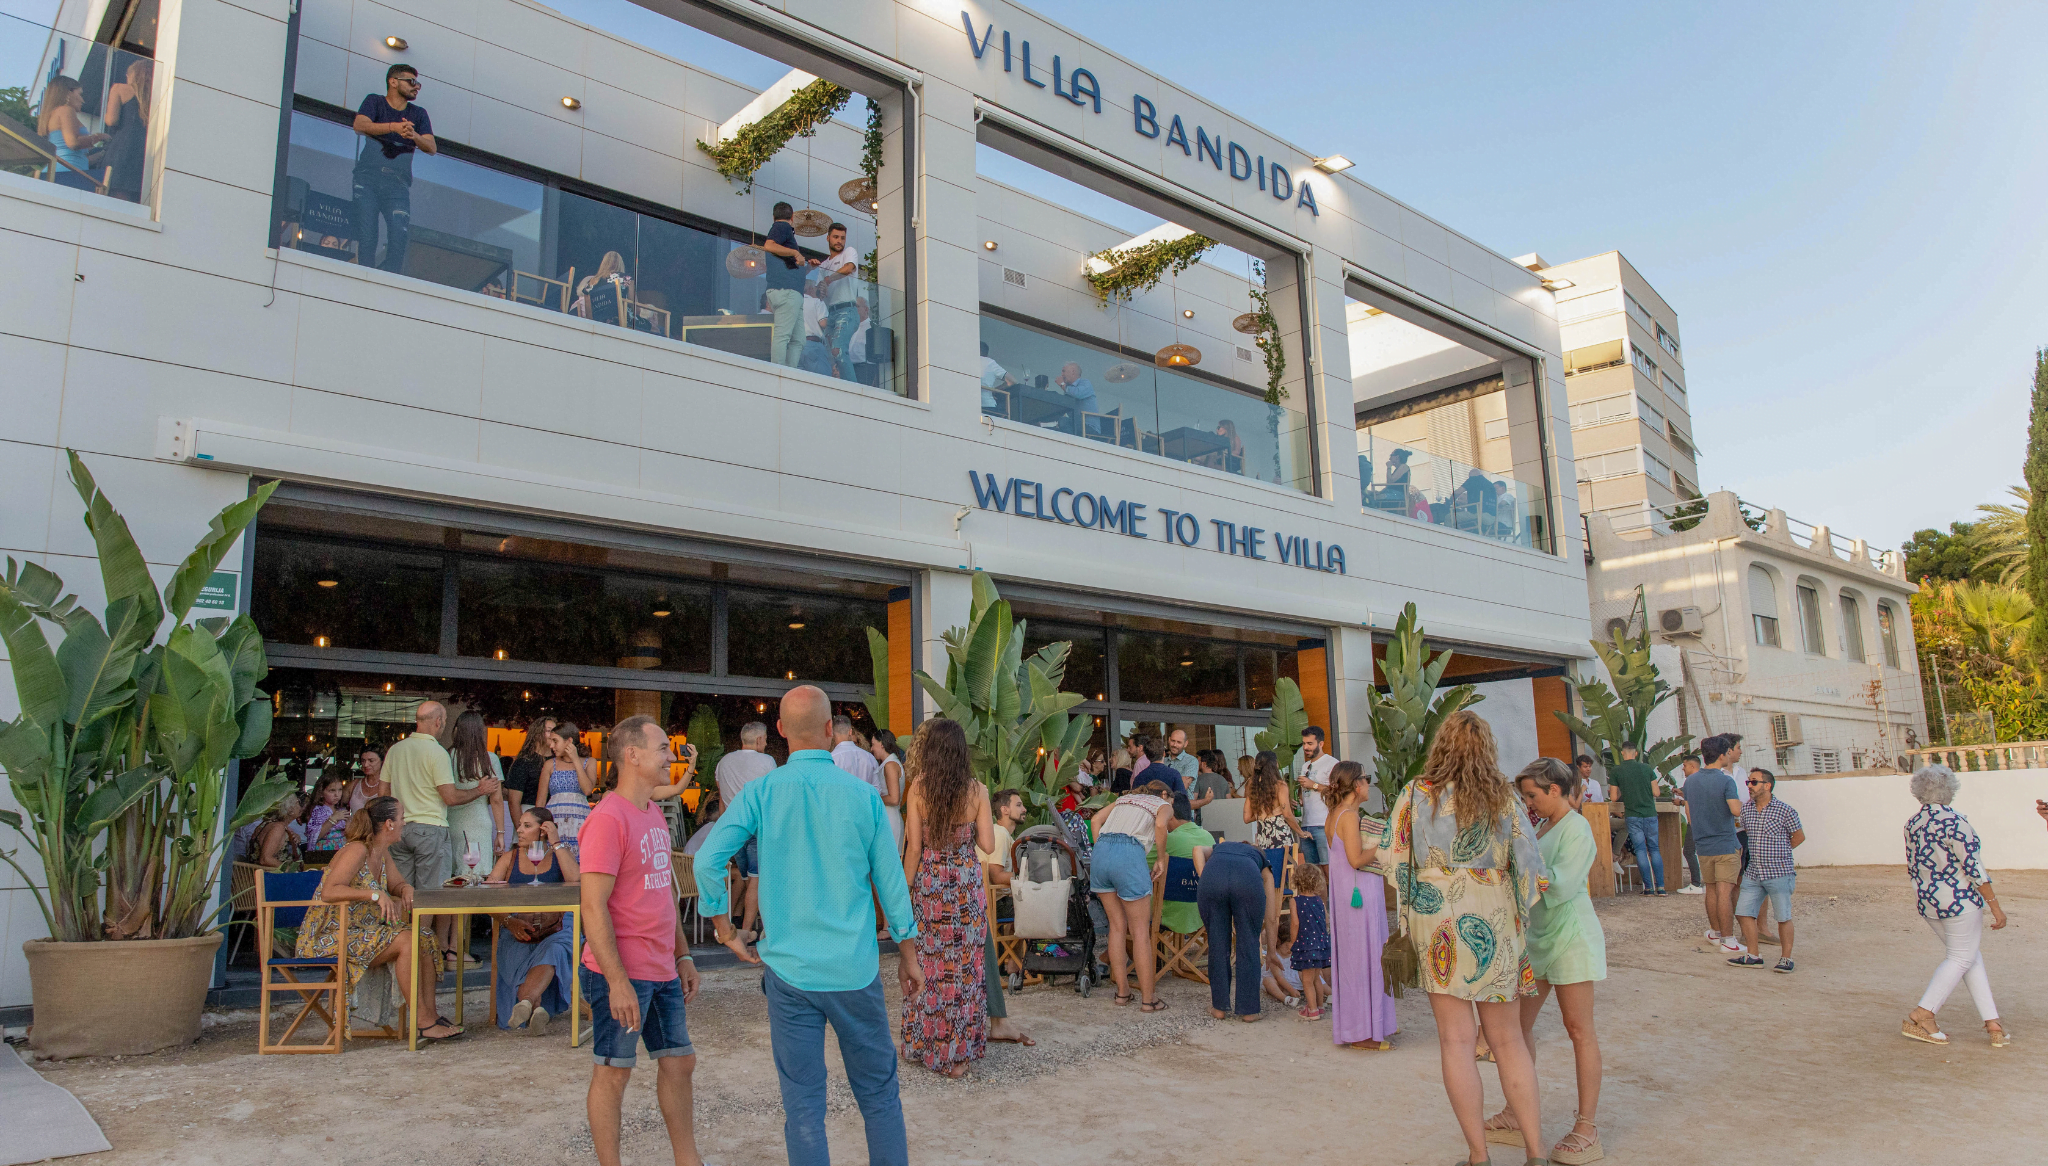 Villa Bandida, the latest bet by Grupo Cala Bandida, opens its doors in  Alicante